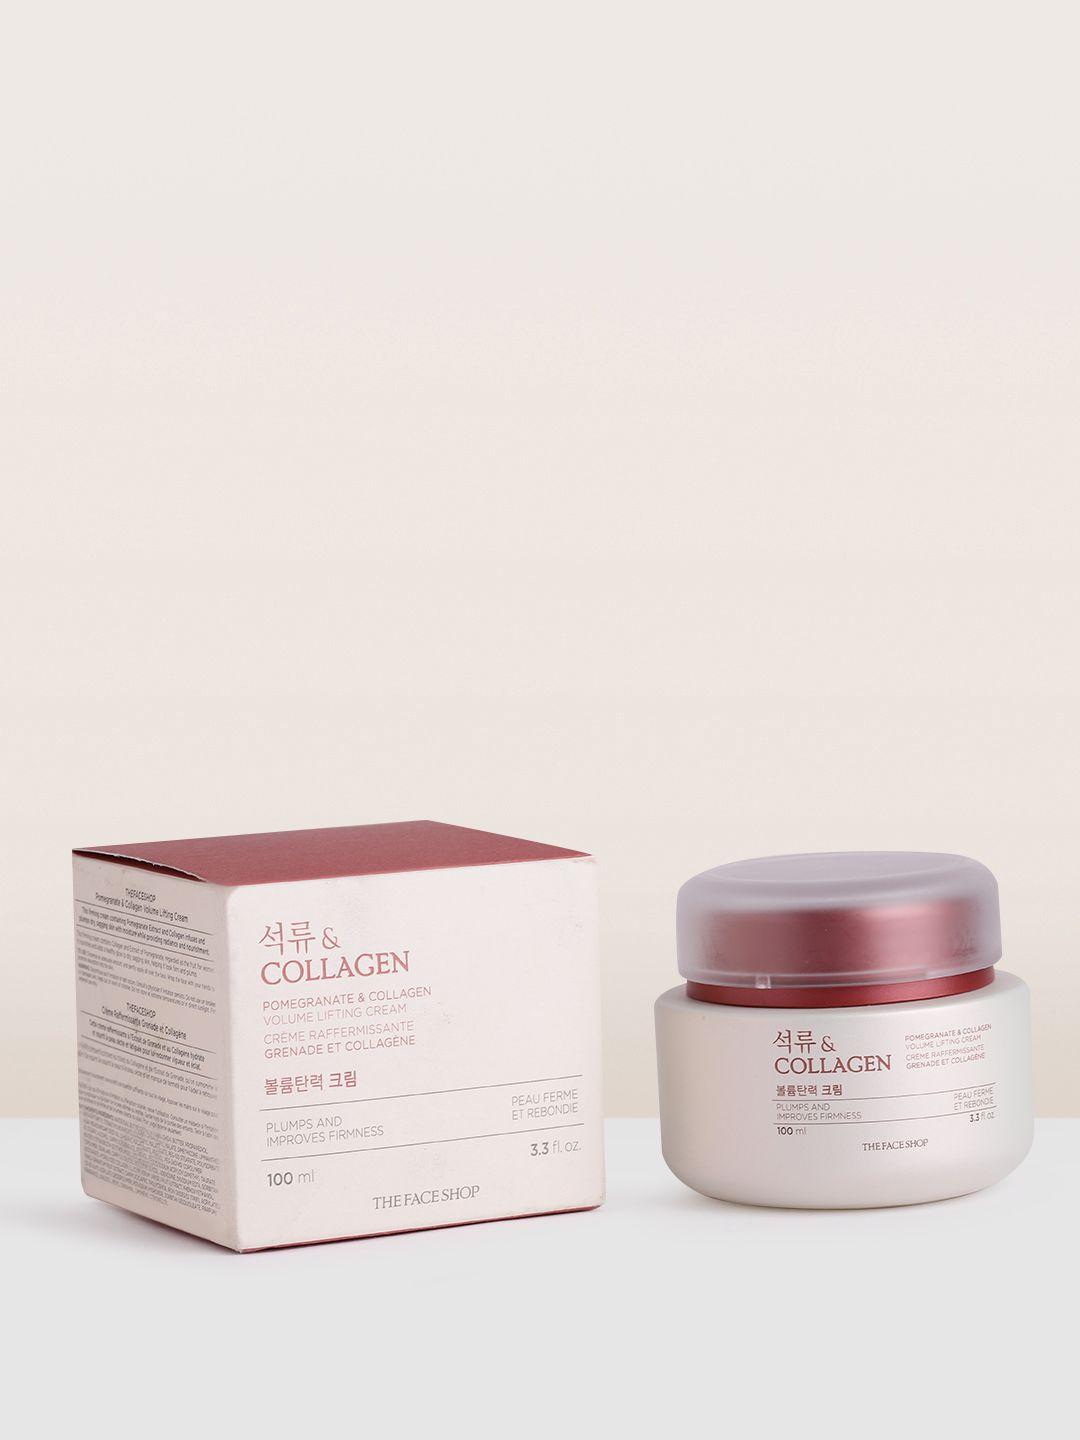 the face shop pomegranate & collagen volume lifting cream for a youthful skin - 100 ml